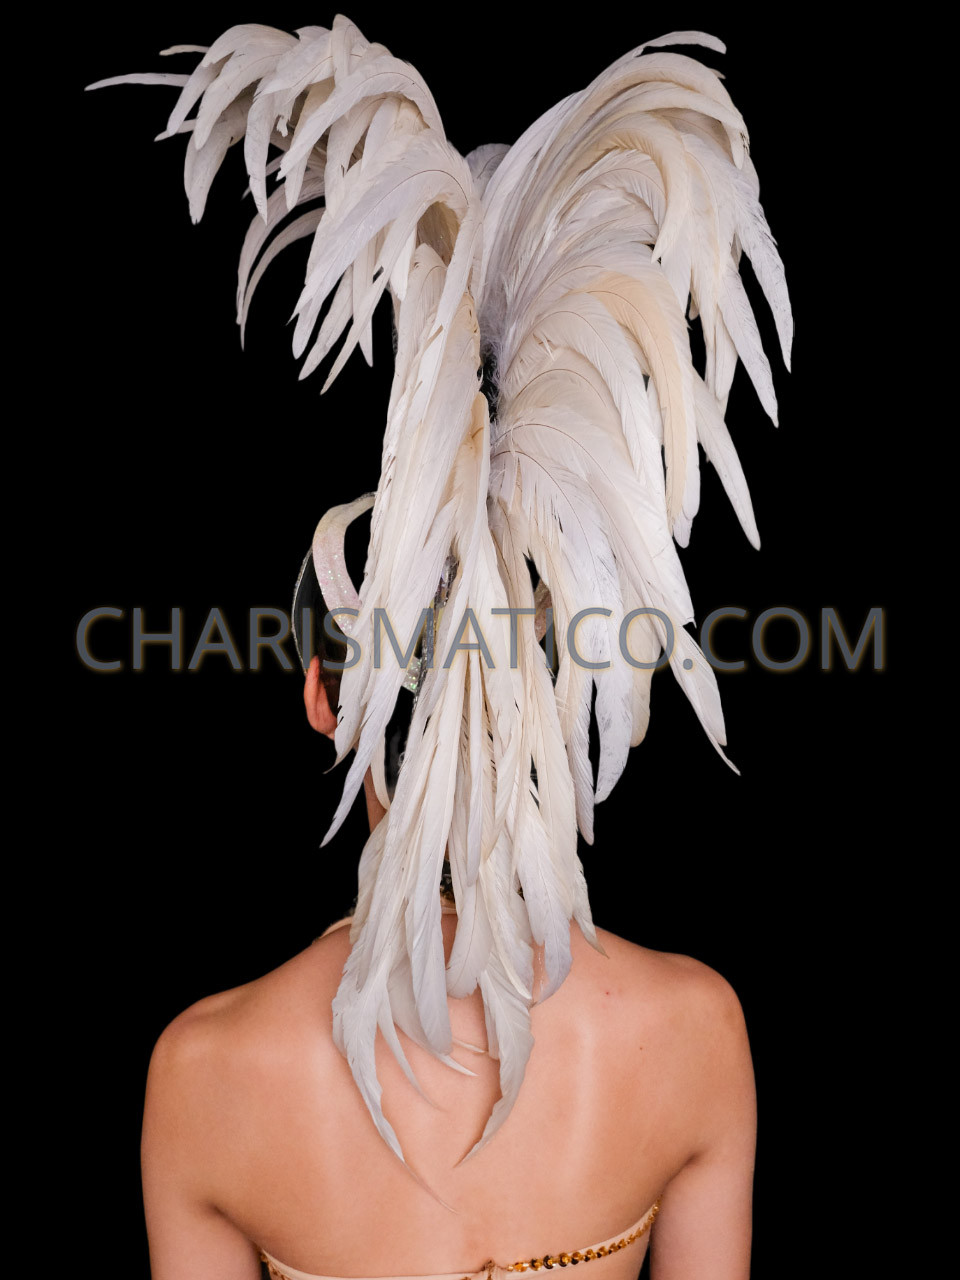 5-7 White Rooster Hackle Feathers for Crafting, Headpiece, 7.5